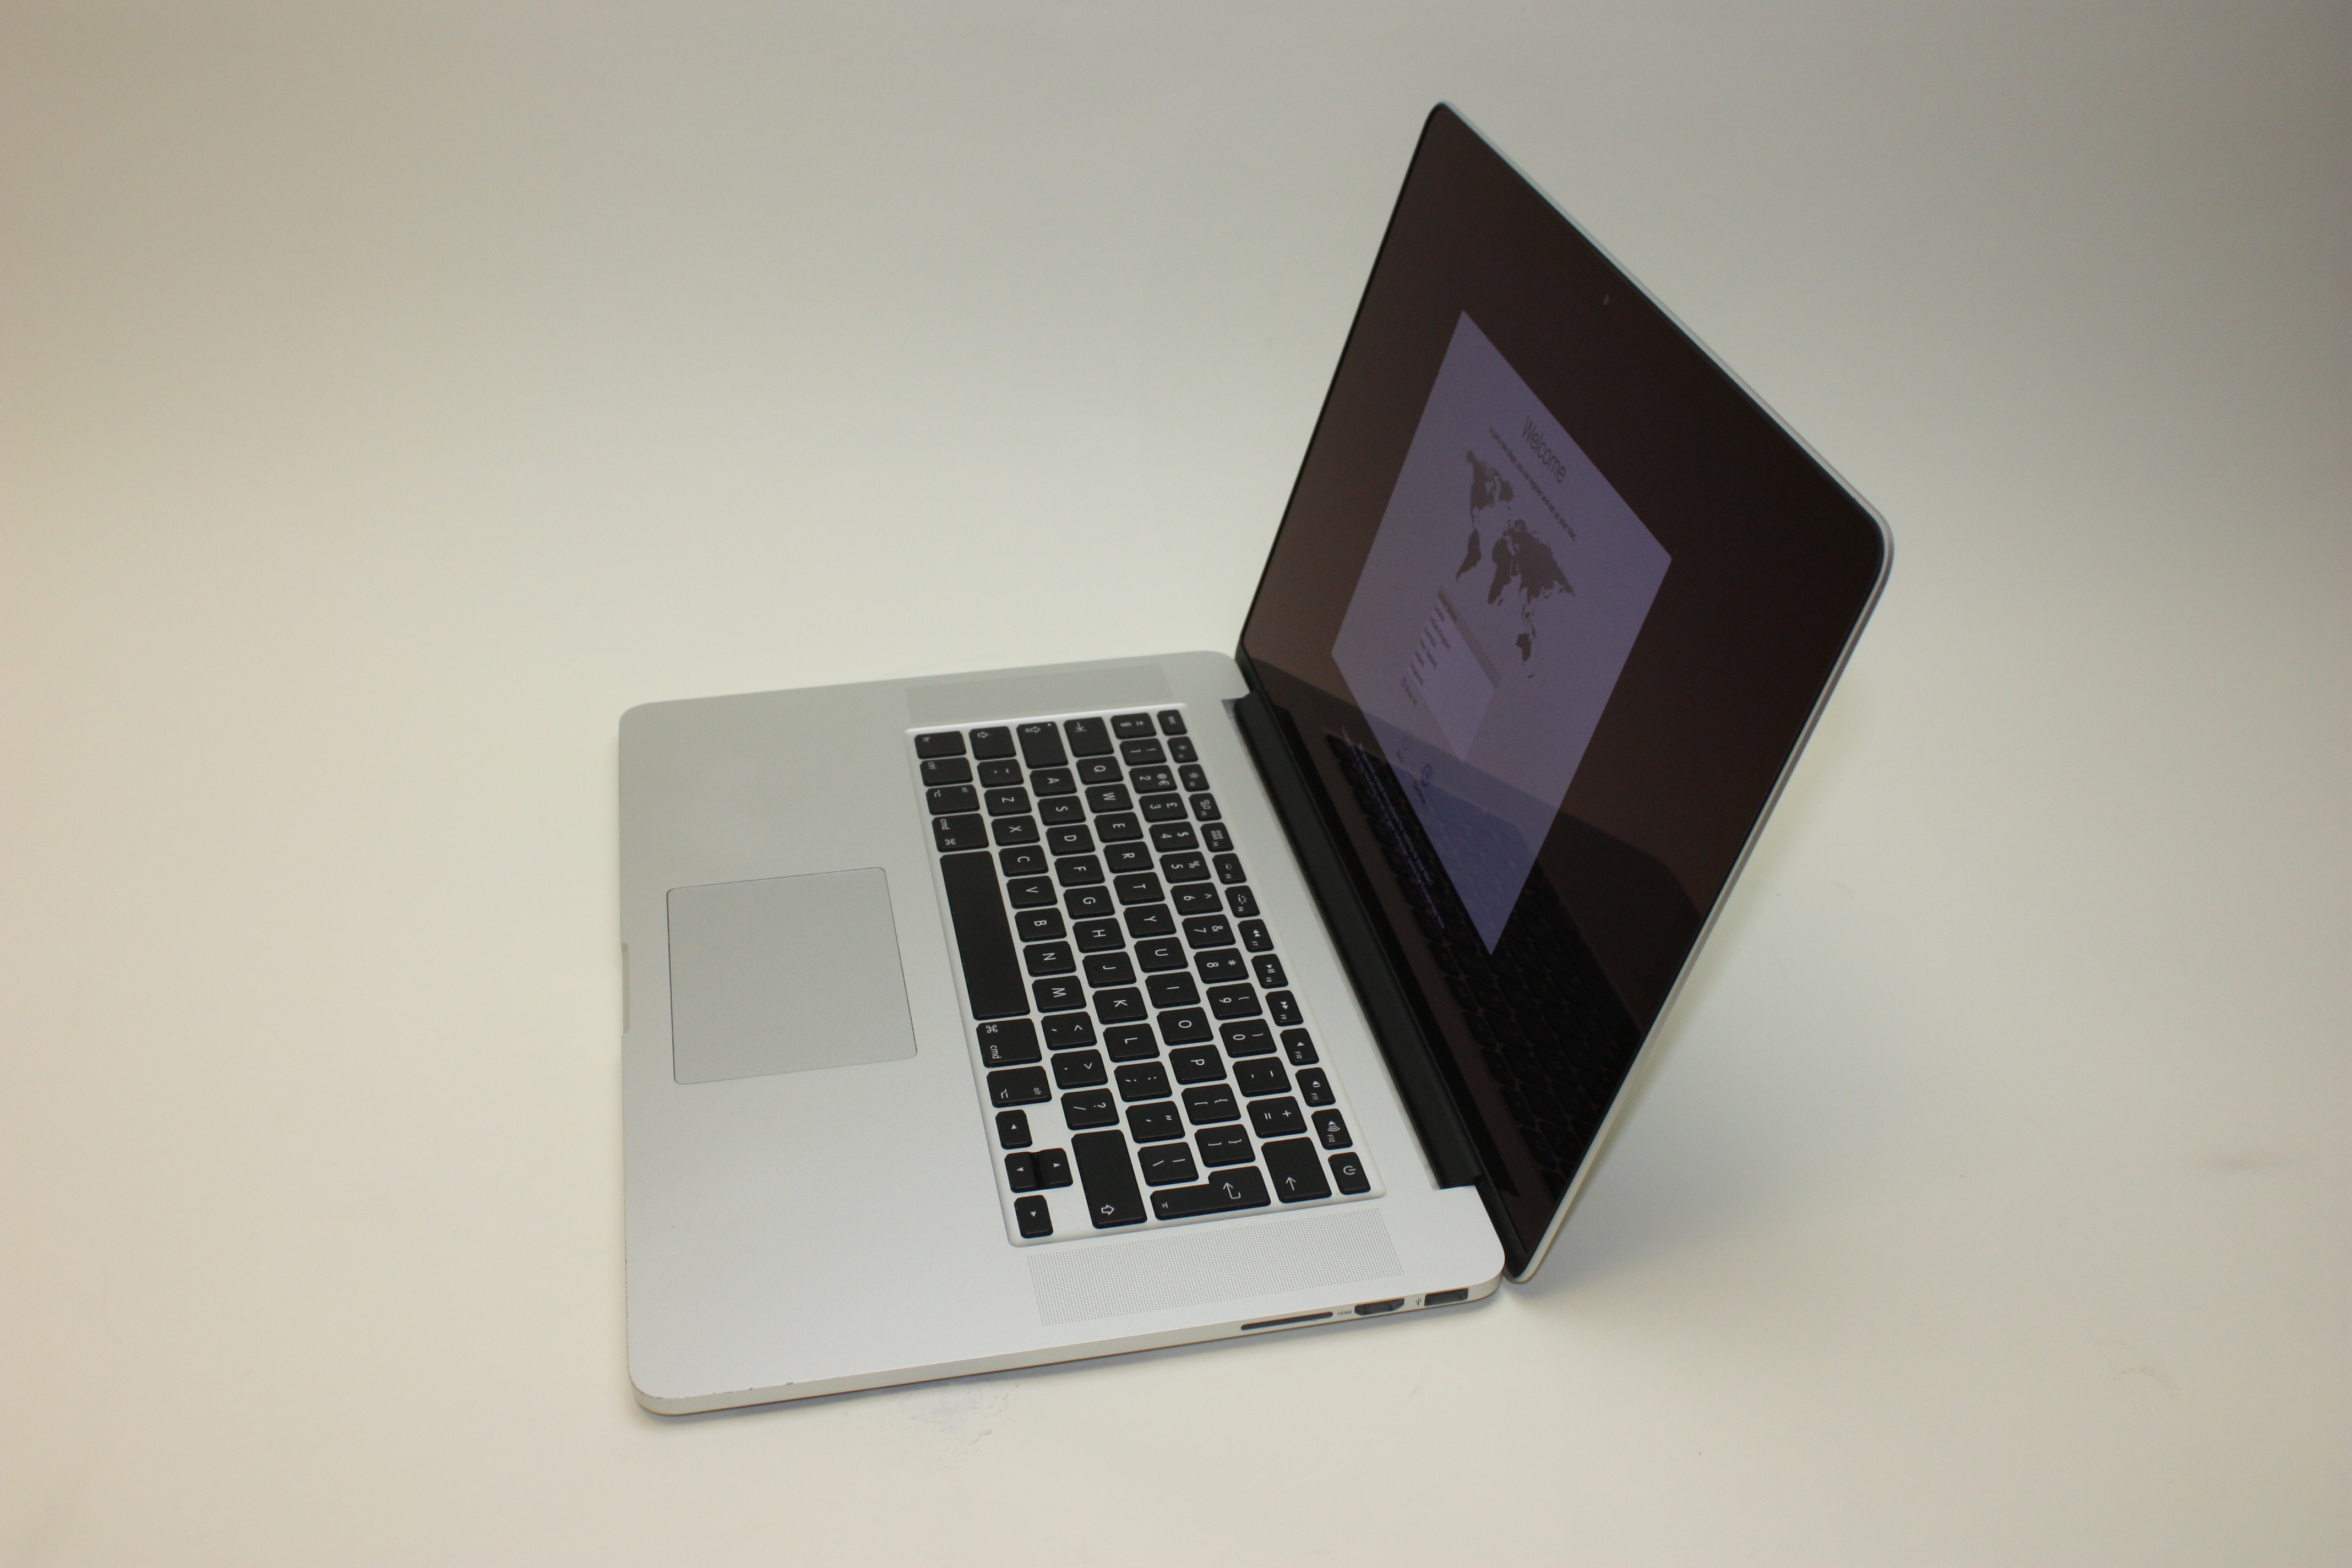 MacBook Pro Retina 15" | mResell | Good Condition and Free Delivery